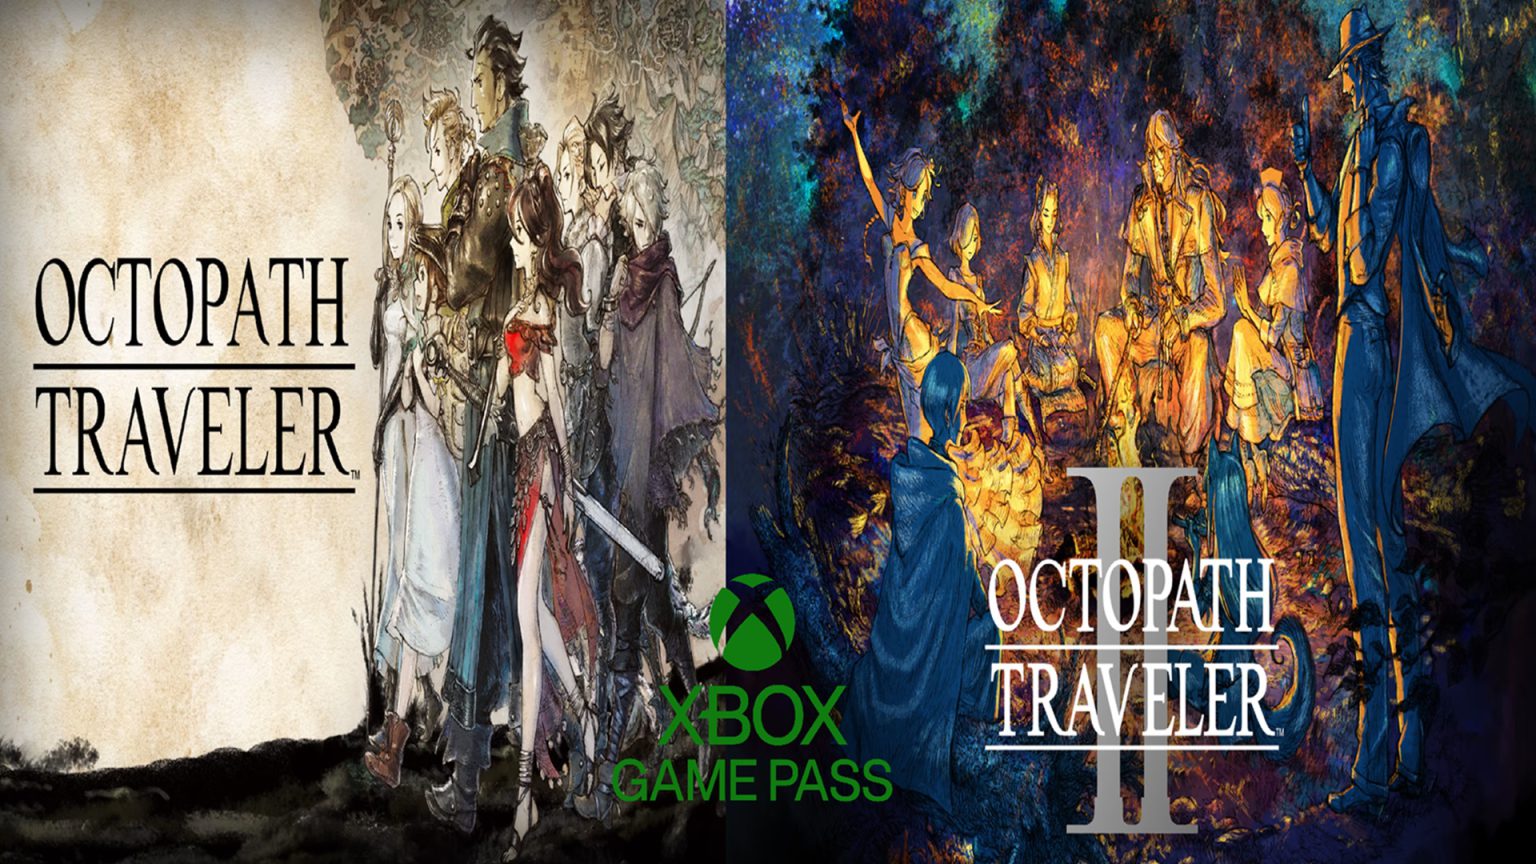 octopath traveler 1 and 2 xbox game pass